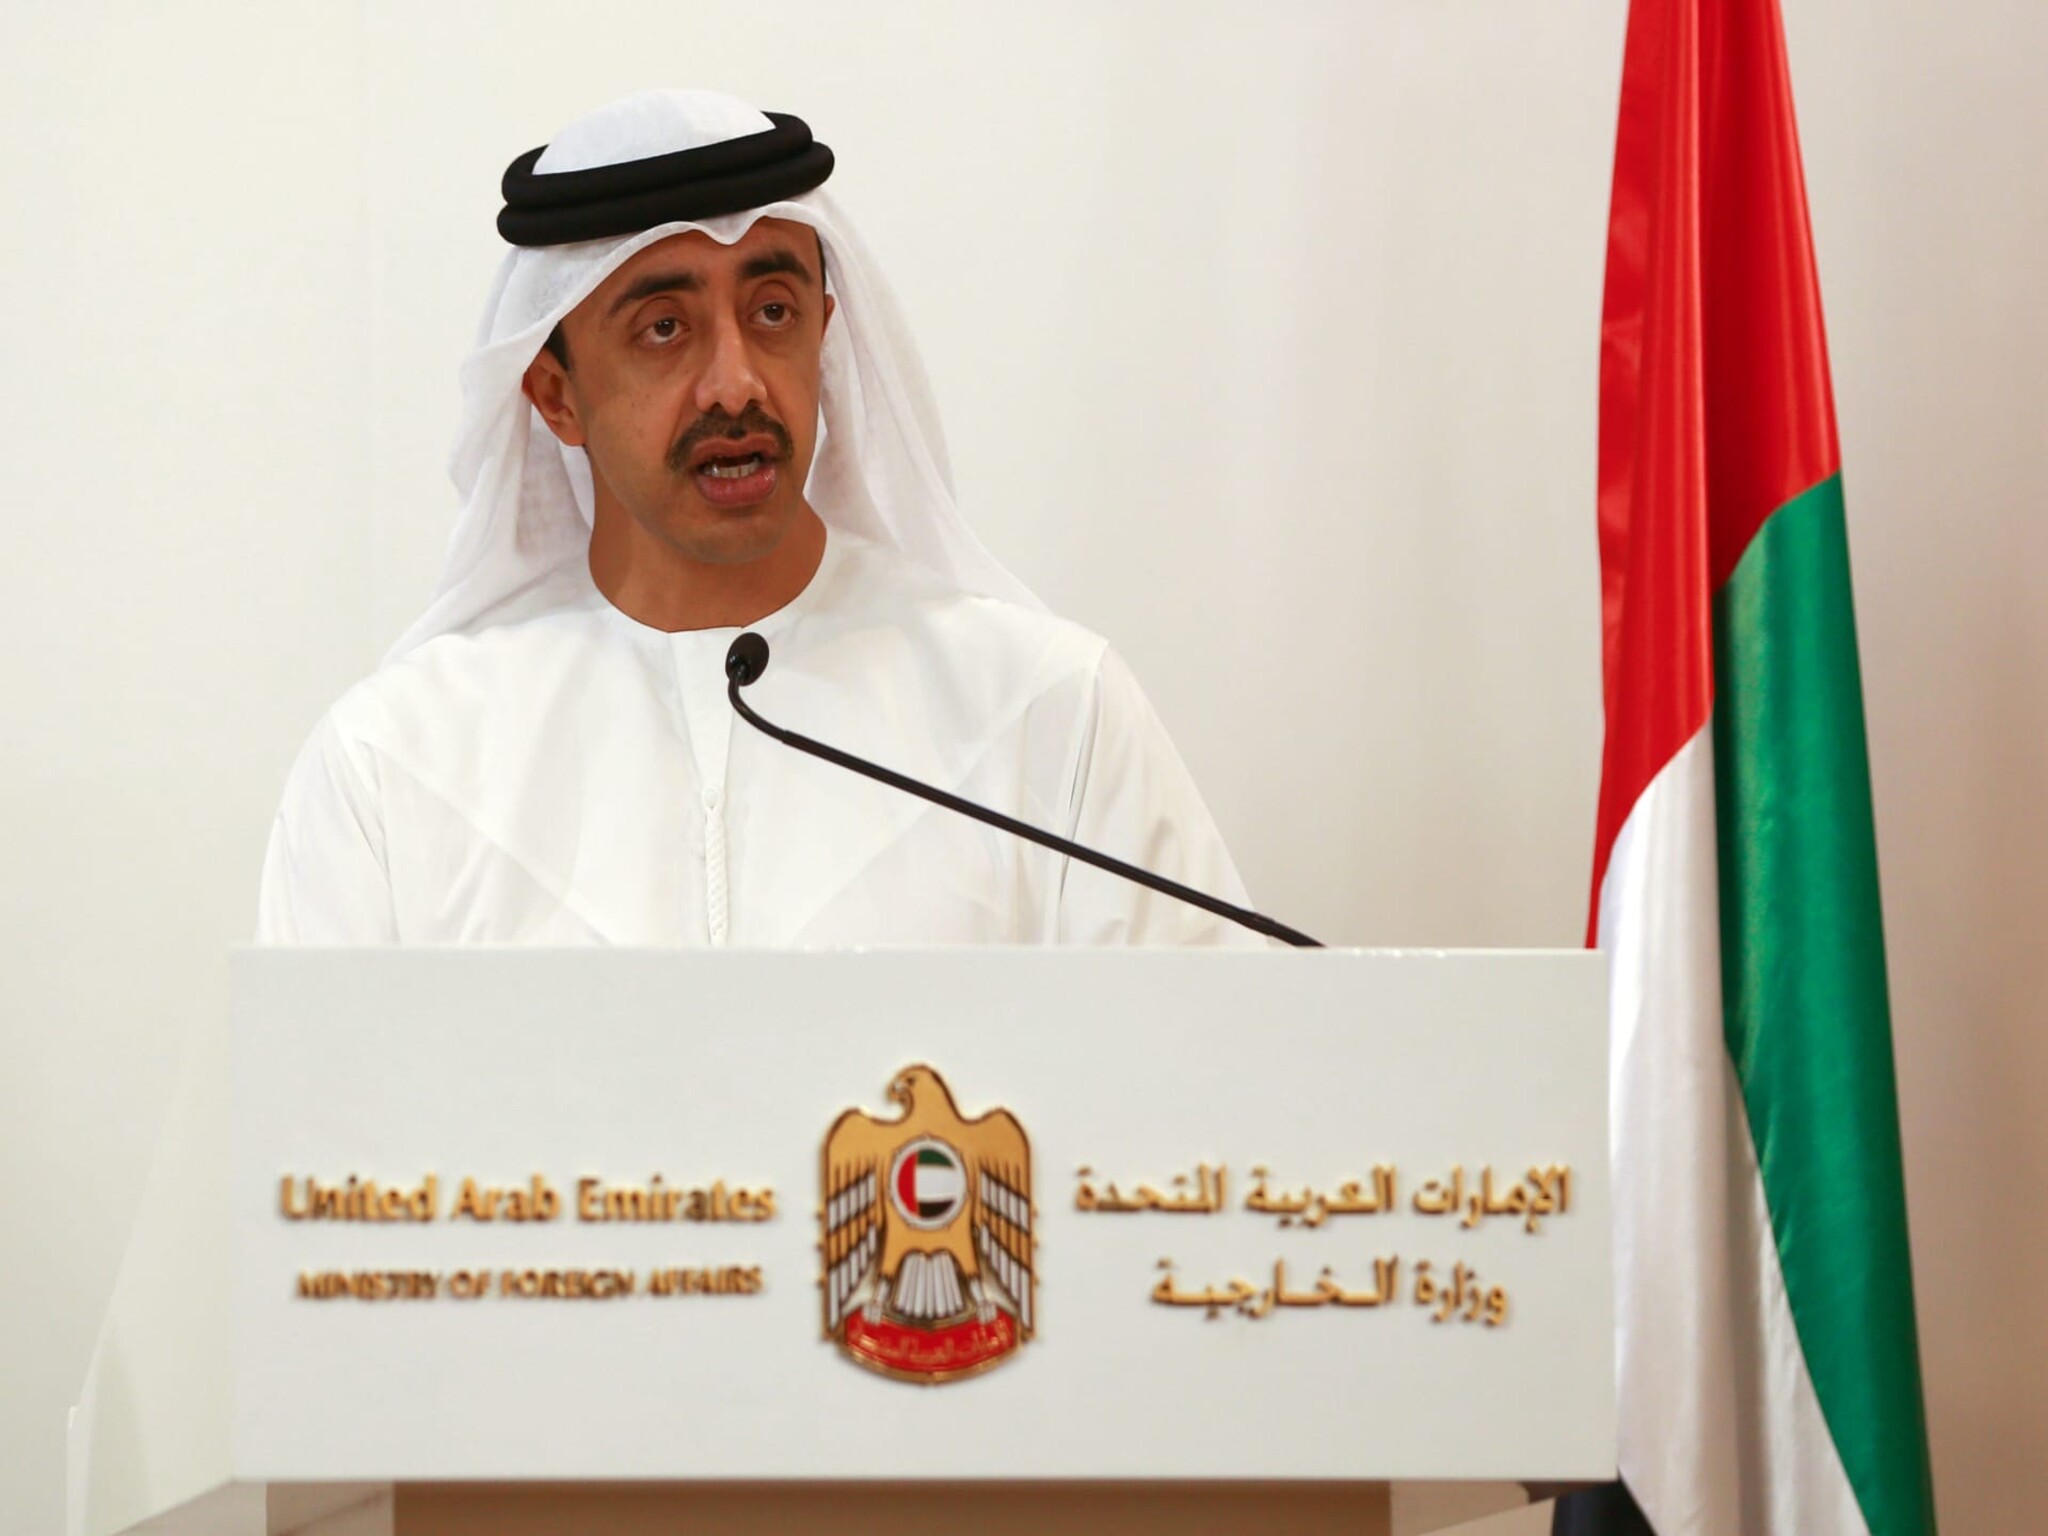 UAE: Ministry of Foreign Affairs issued a warning to travelers to 6 countries